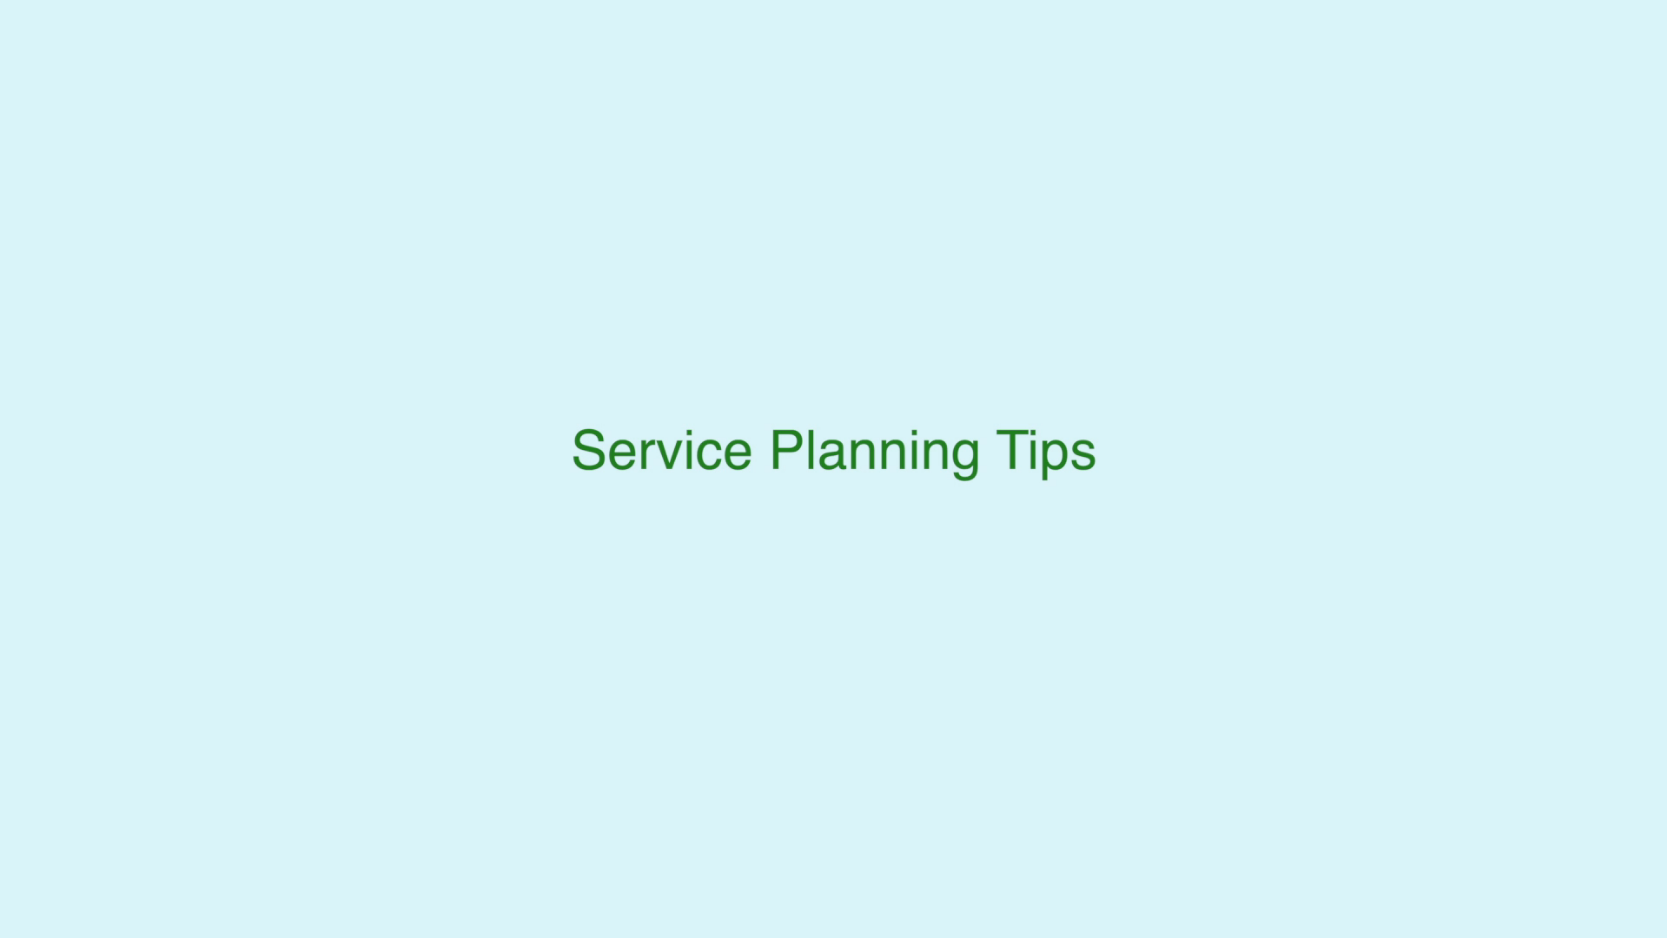 ACS Rise Service Planning Tips For Parents With Blue Background Splash Image